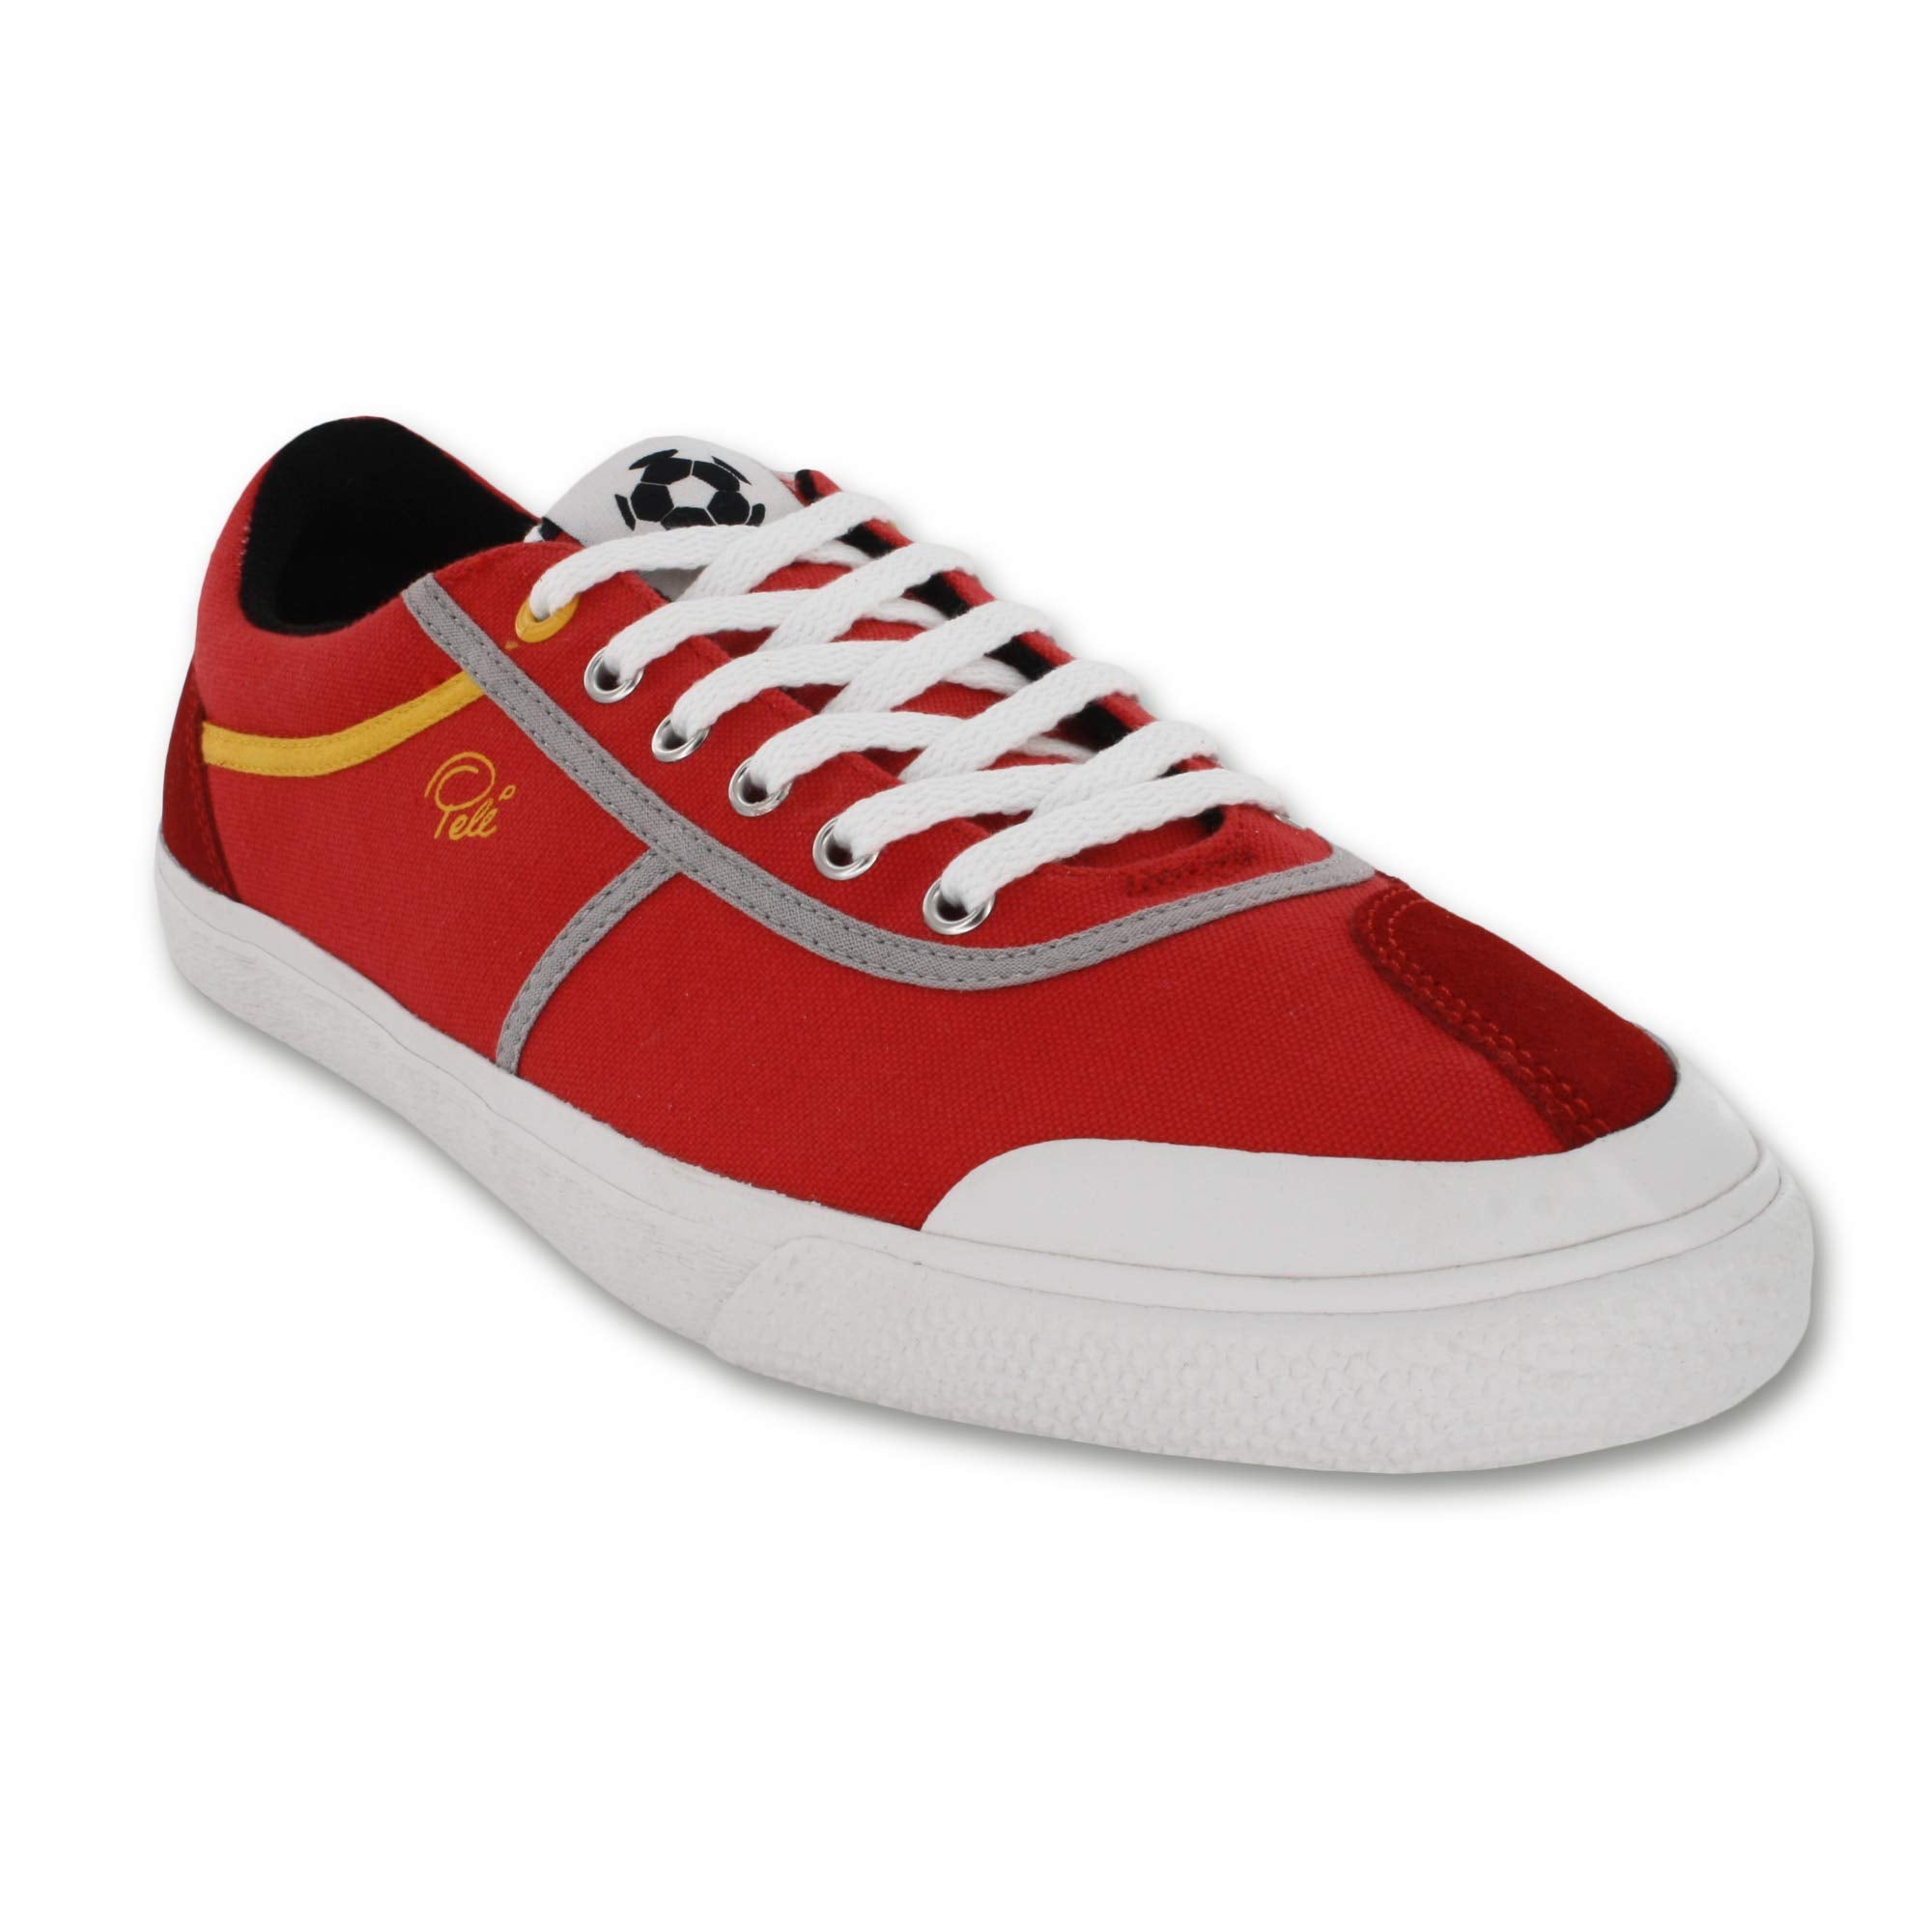 Pele Sports Men's Armador Canvas Sneakers - High Risk Red / Spectra Yellow